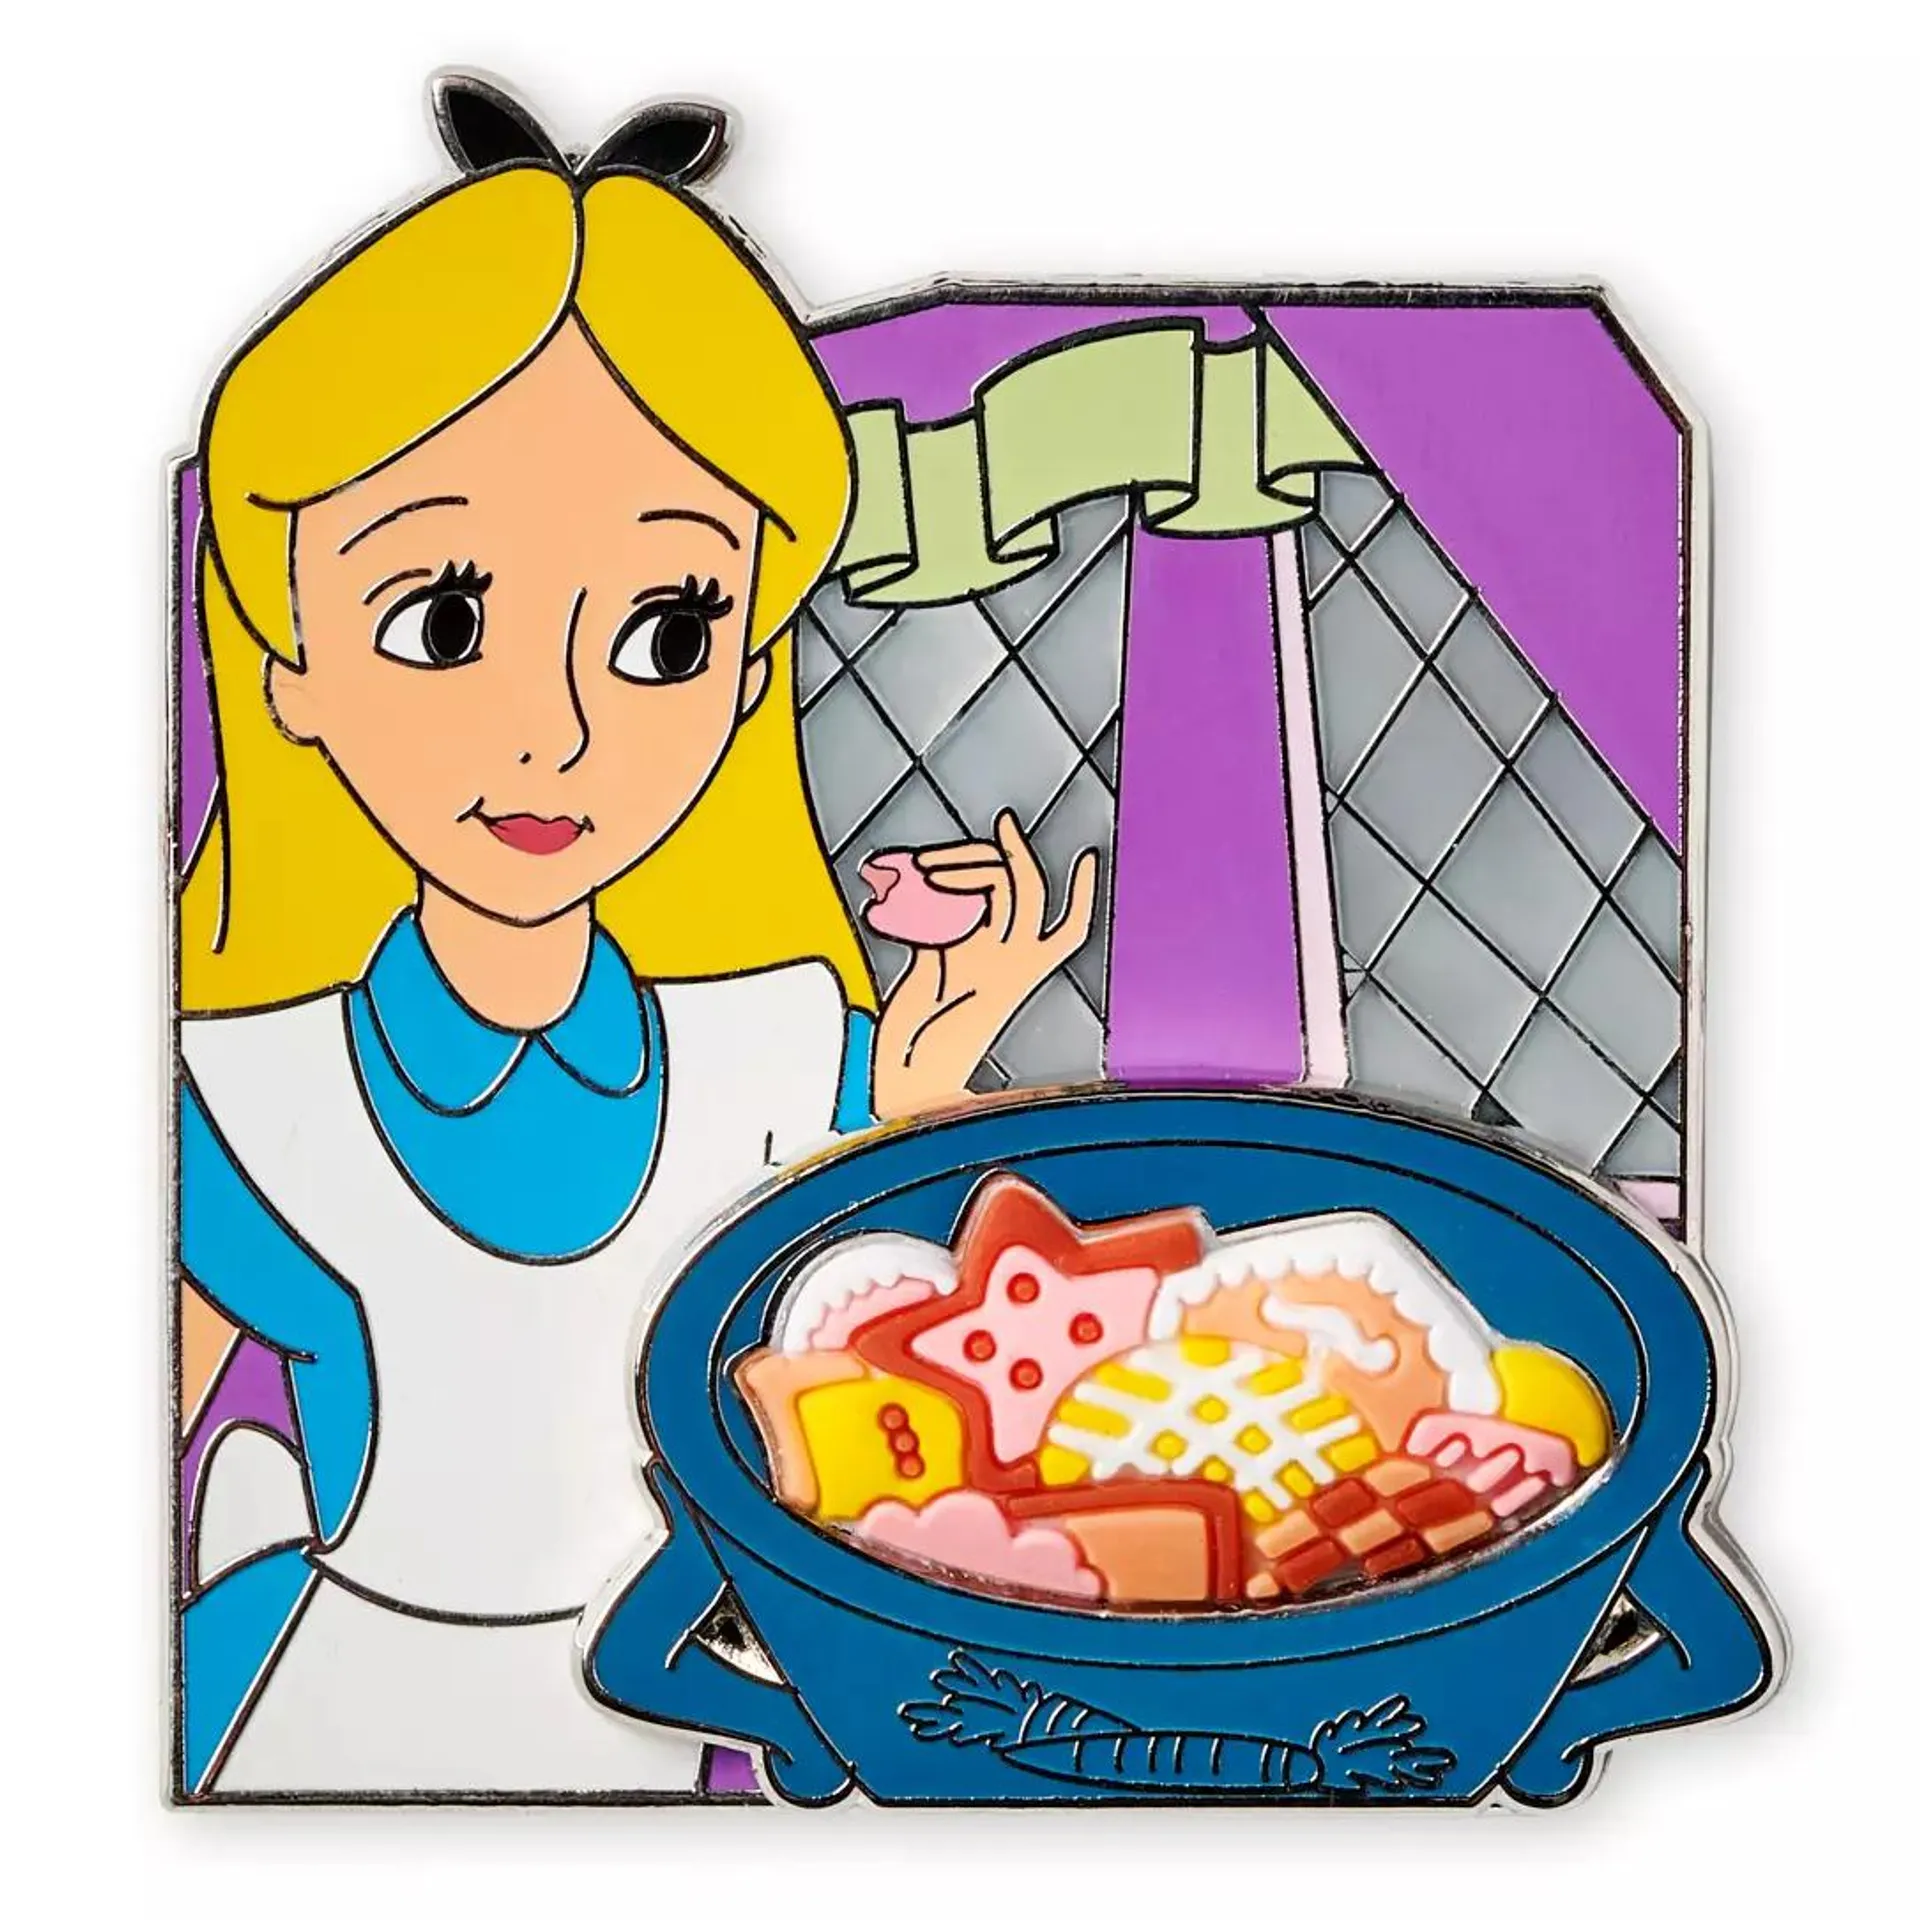 Disney Store Alice in Wonderland Limited Edition Pin